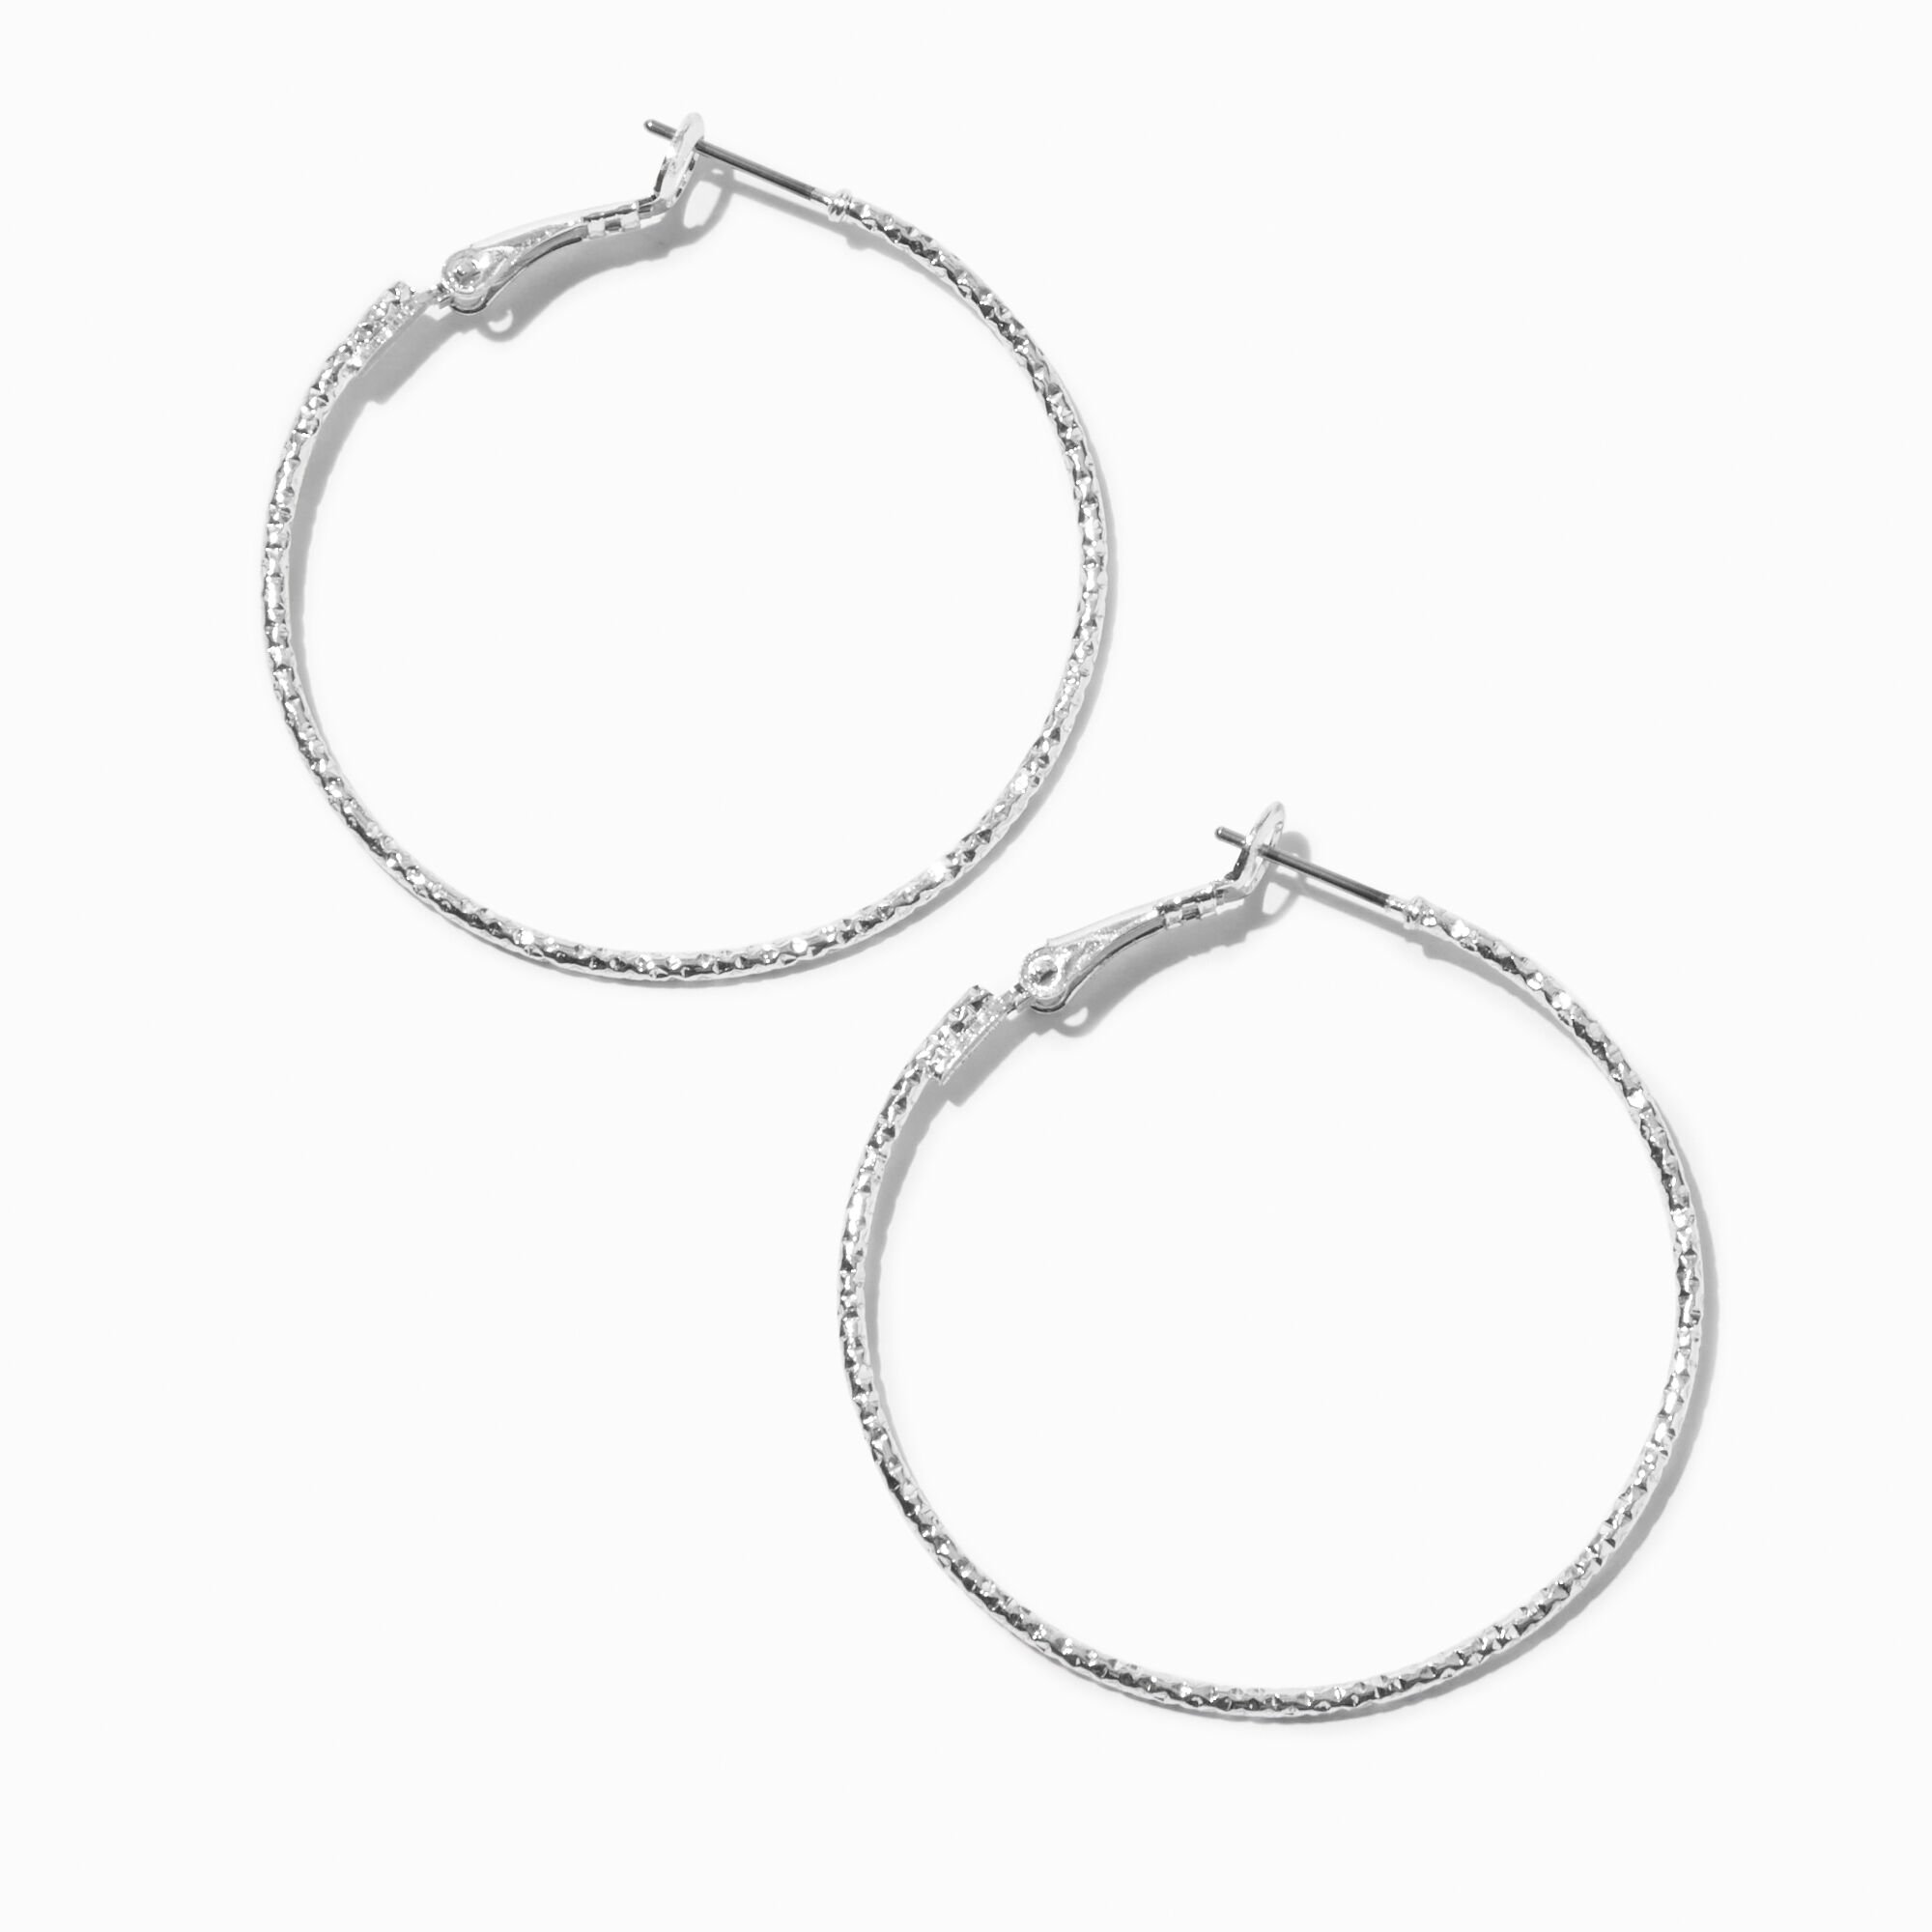 View Claires Tone 40MM Laser Cut Hoop Earrings Silver information